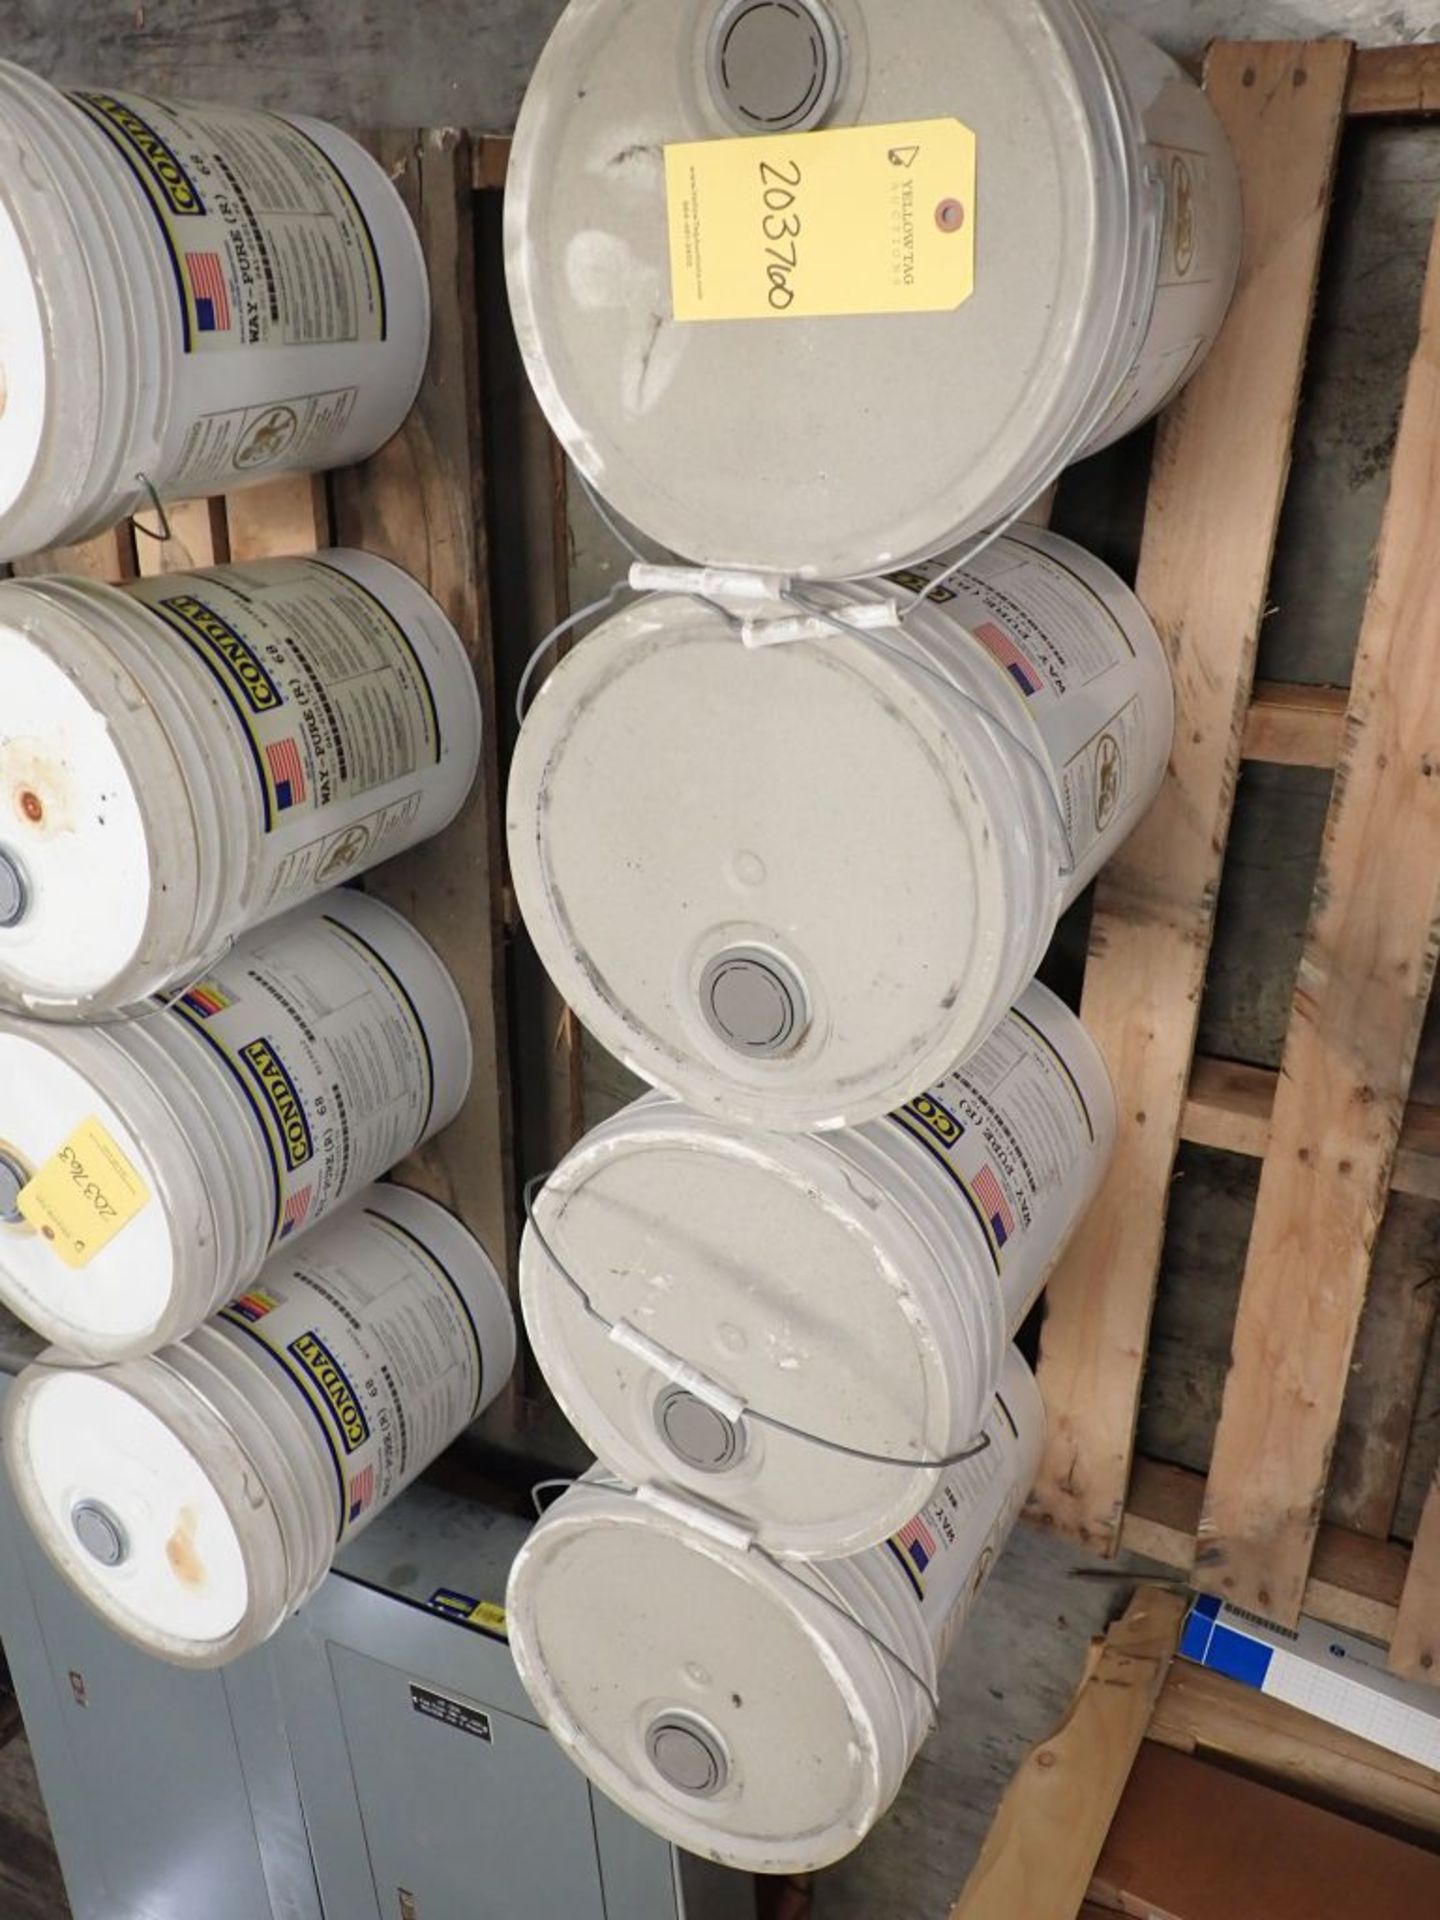 Lot of (4) Containers of 5-Gallon Condat Wire Lubricant | Item Key: 041-0191-70; New Surplus - Image 3 of 12